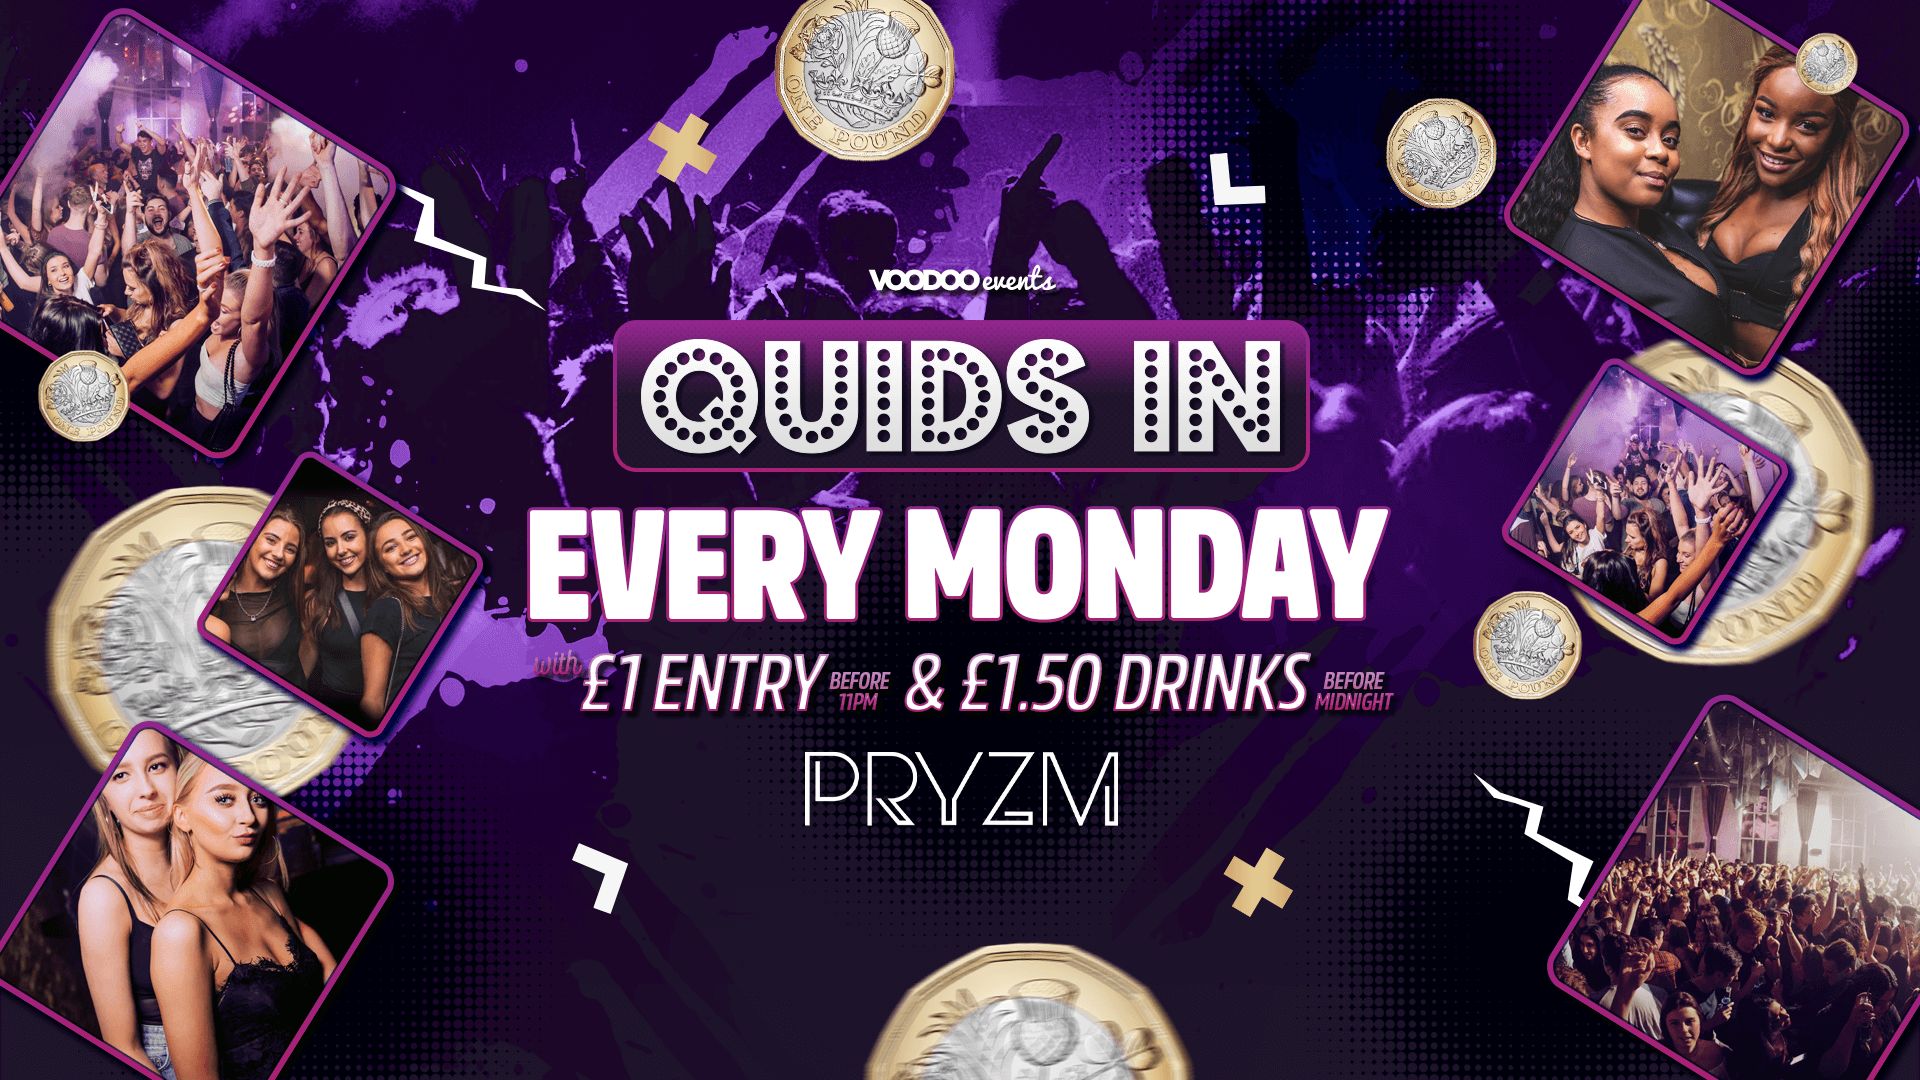 Quids In Mondays at PRYZM – 27th September